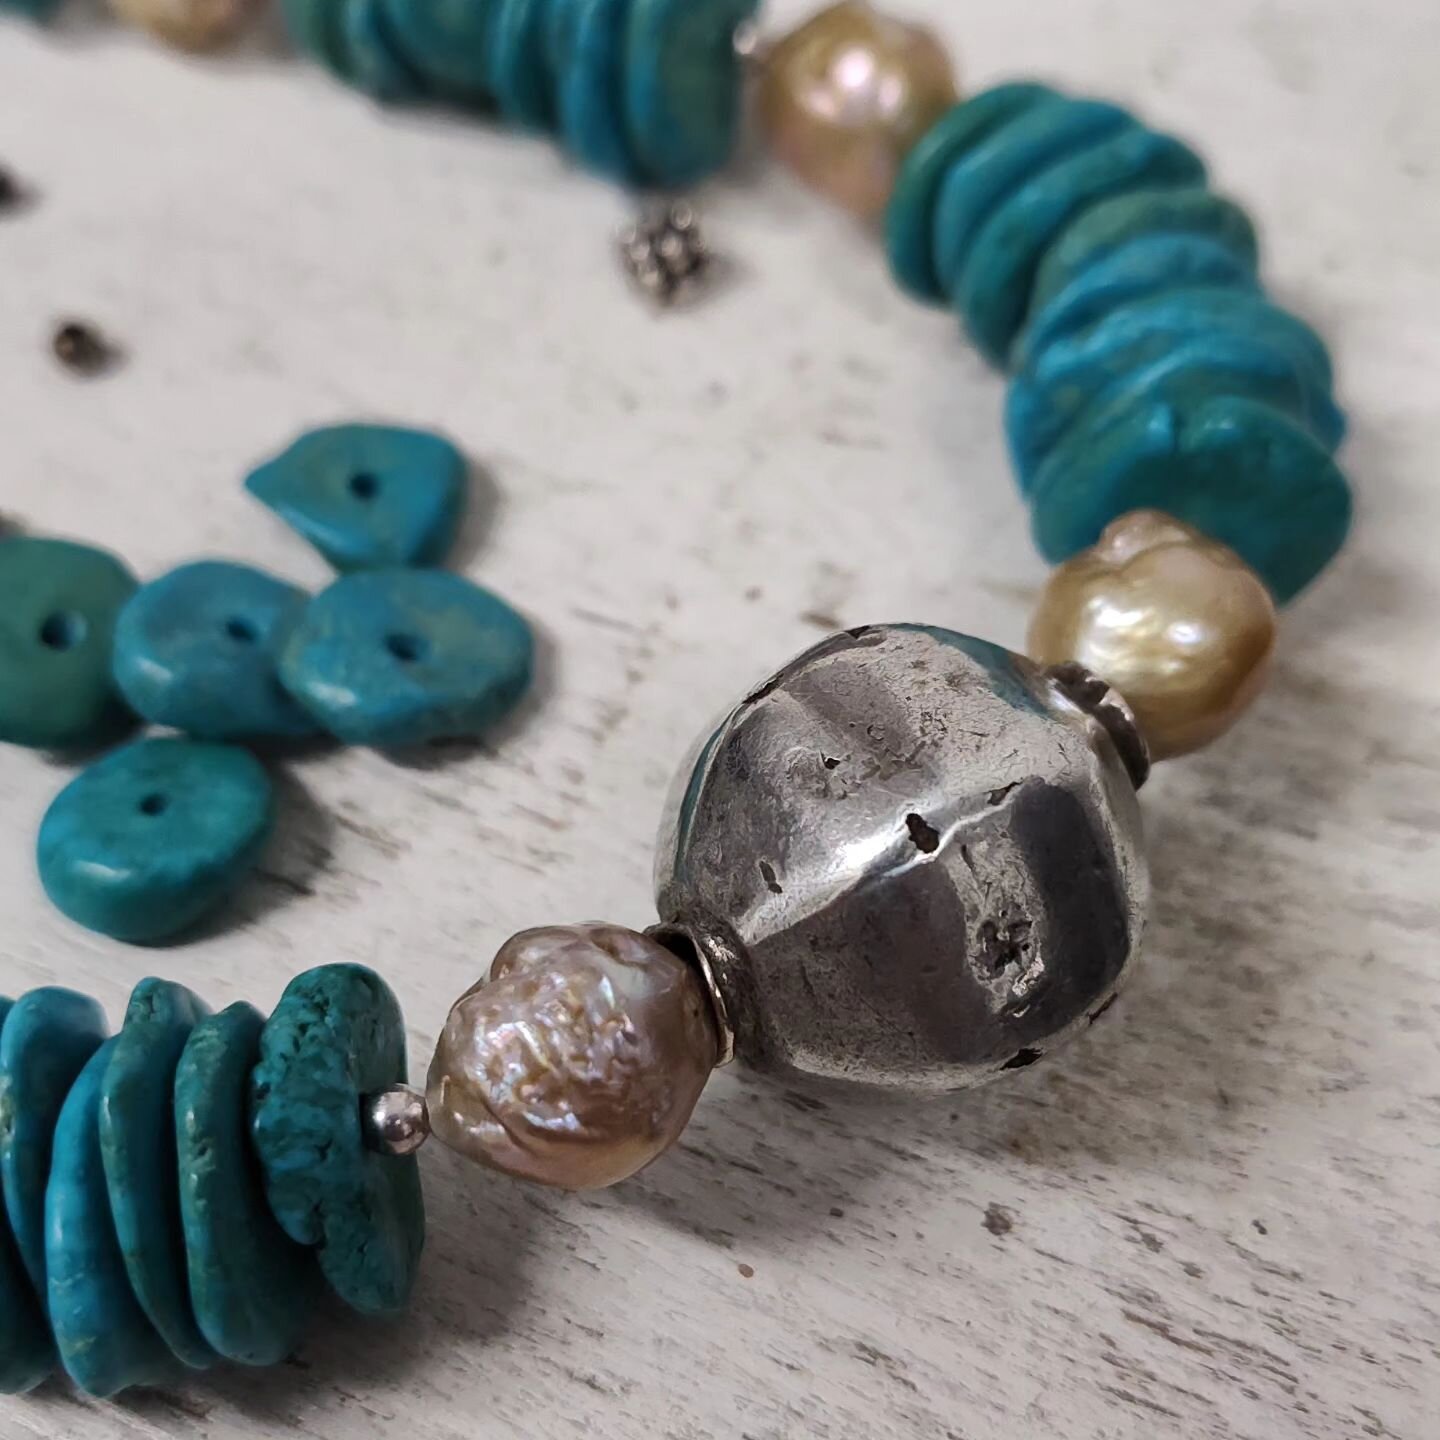 🌷 Working on something different today. Turquoise chips, baroque pearls and a large vintage silver African bead that's at least a hundred years old. The man that I purchased these beads from said they've been in his family for a long time. I told hi